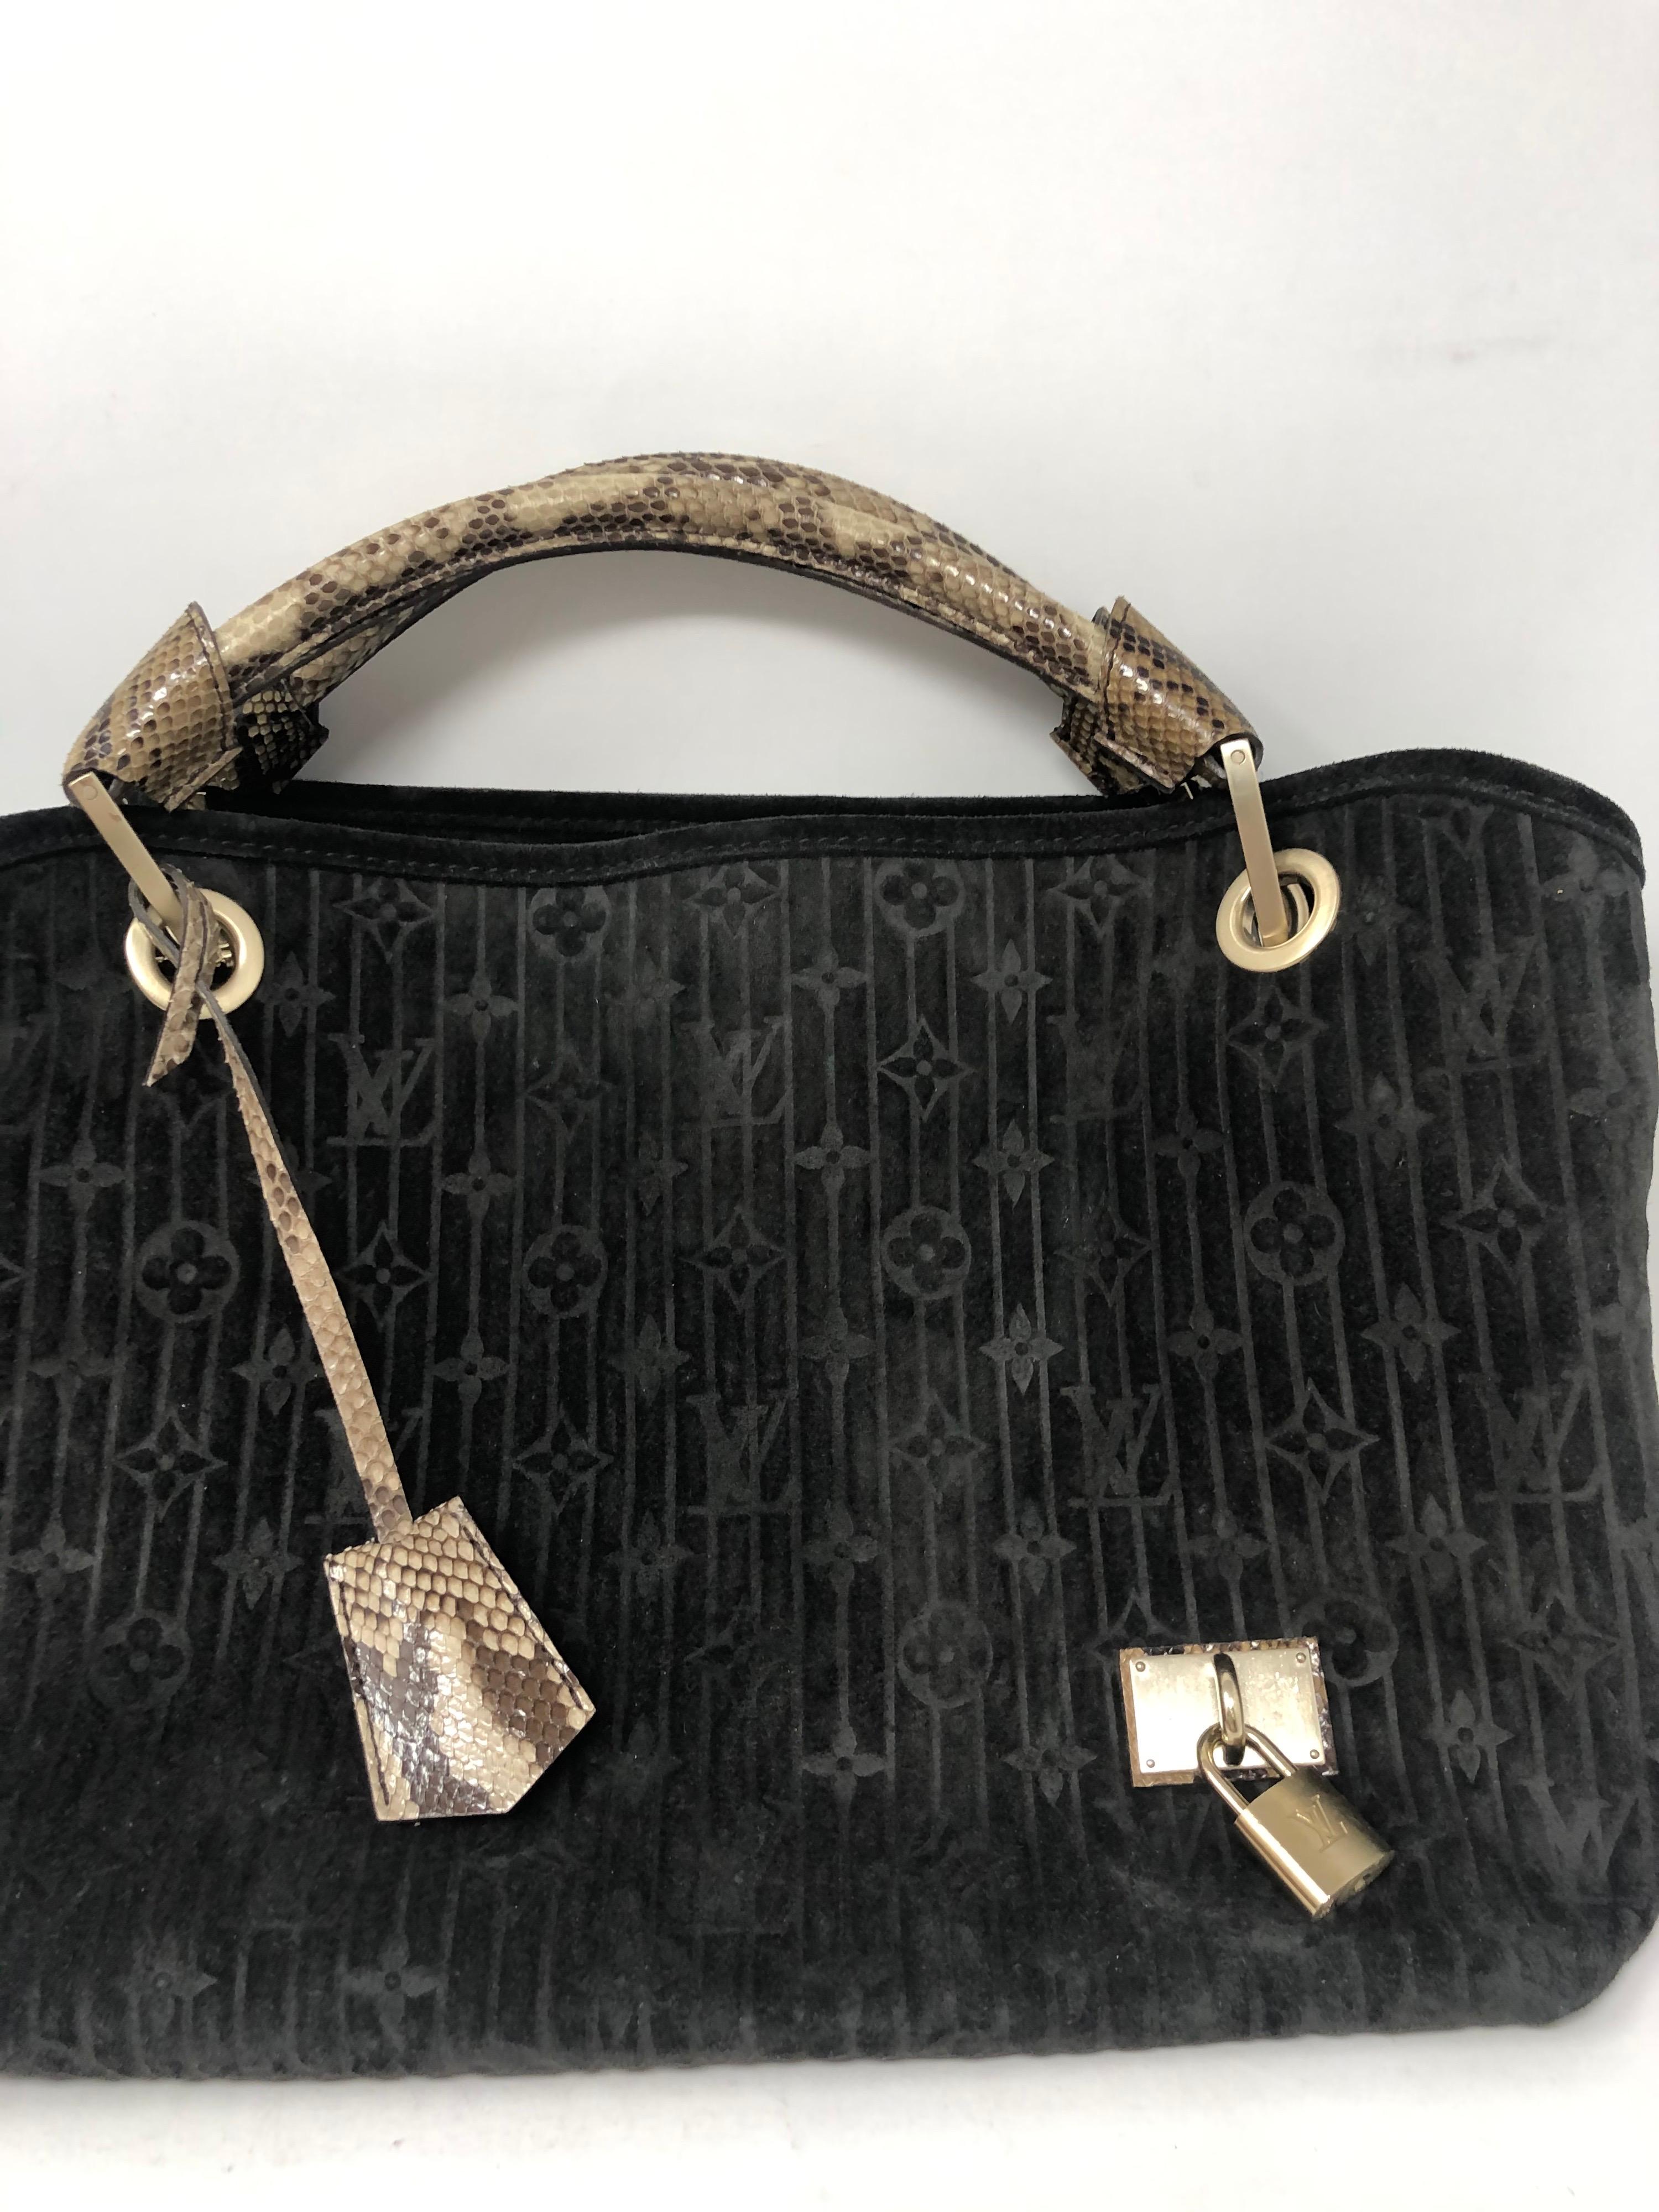 Louis Vuitton Black Suede Hobo Style Bag. Python handles. Rare and limited bag. Has gold lock and keys. Python clochette too. Gently worn. Lots of life left. Guaranteed authentic. 